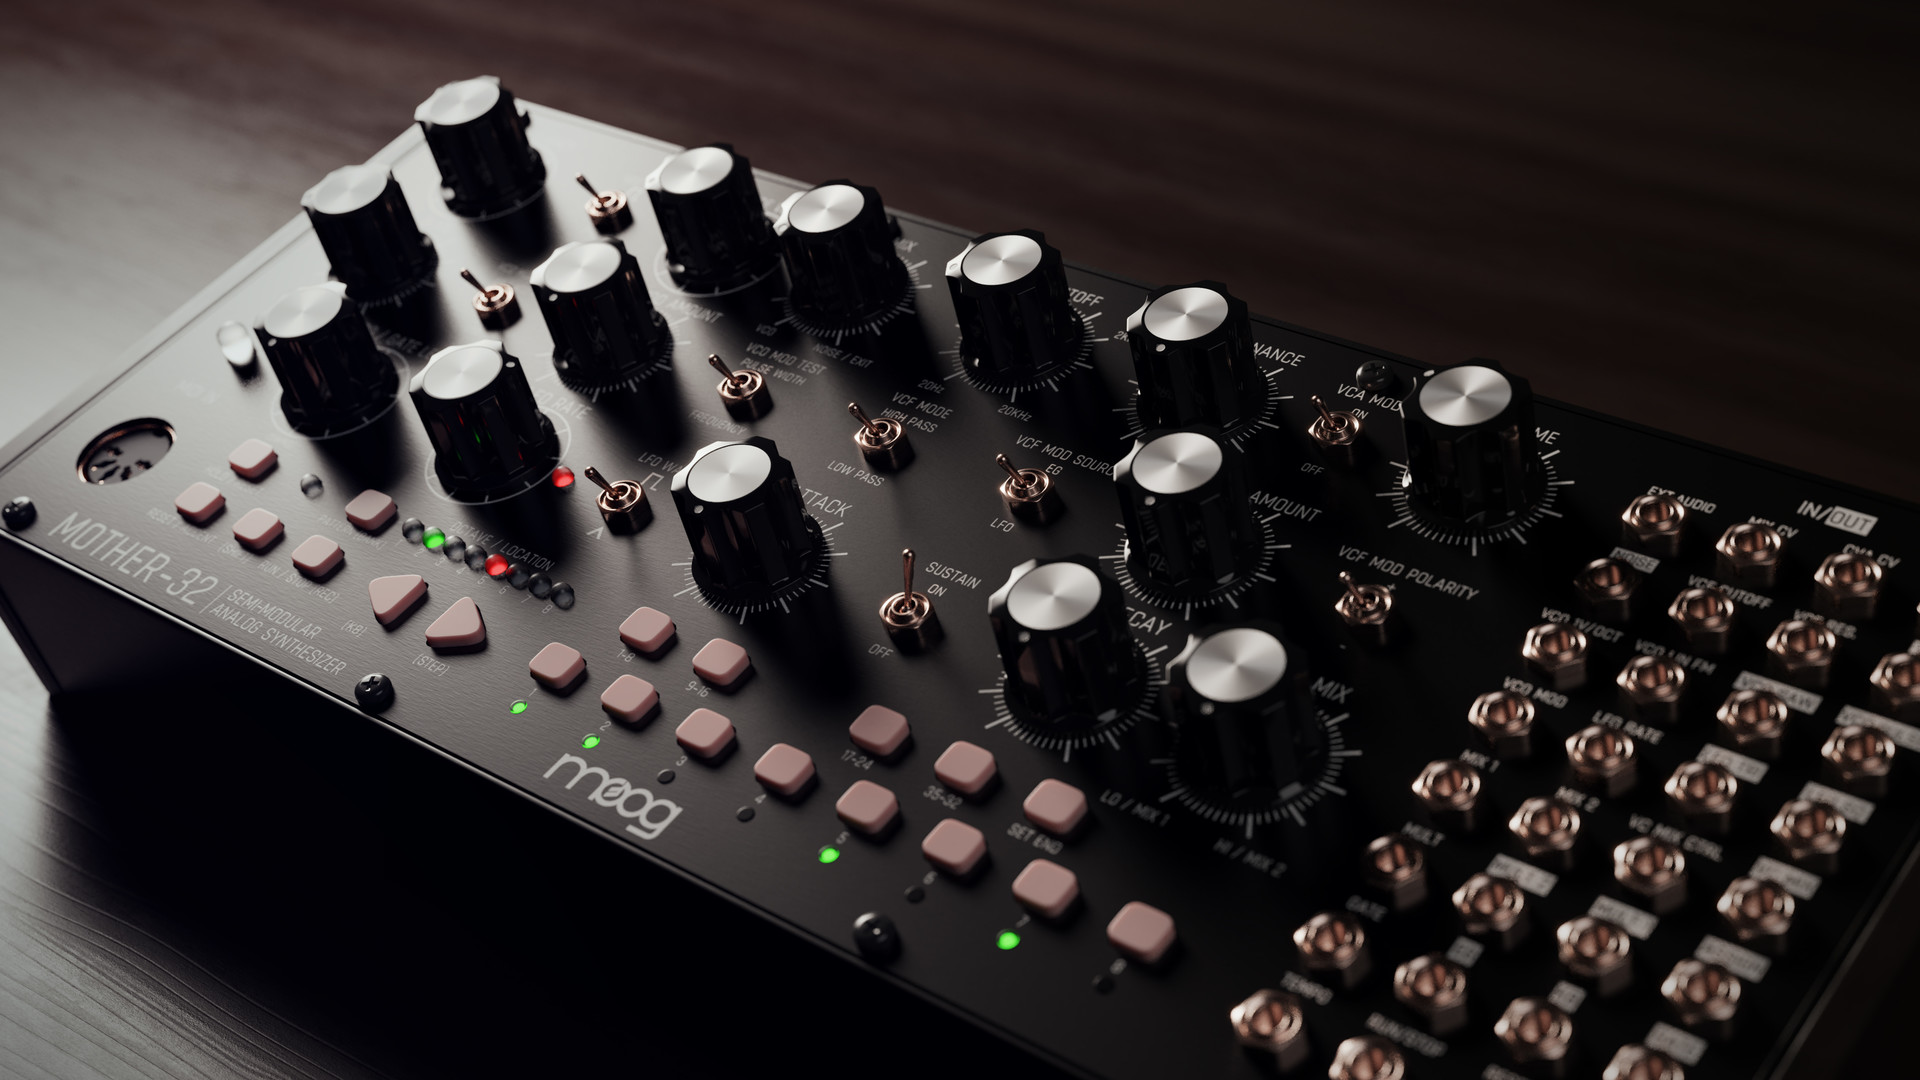 Moog Mother-32 Synthesizer - Moog Mother 32 , HD Wallpaper & Backgrounds